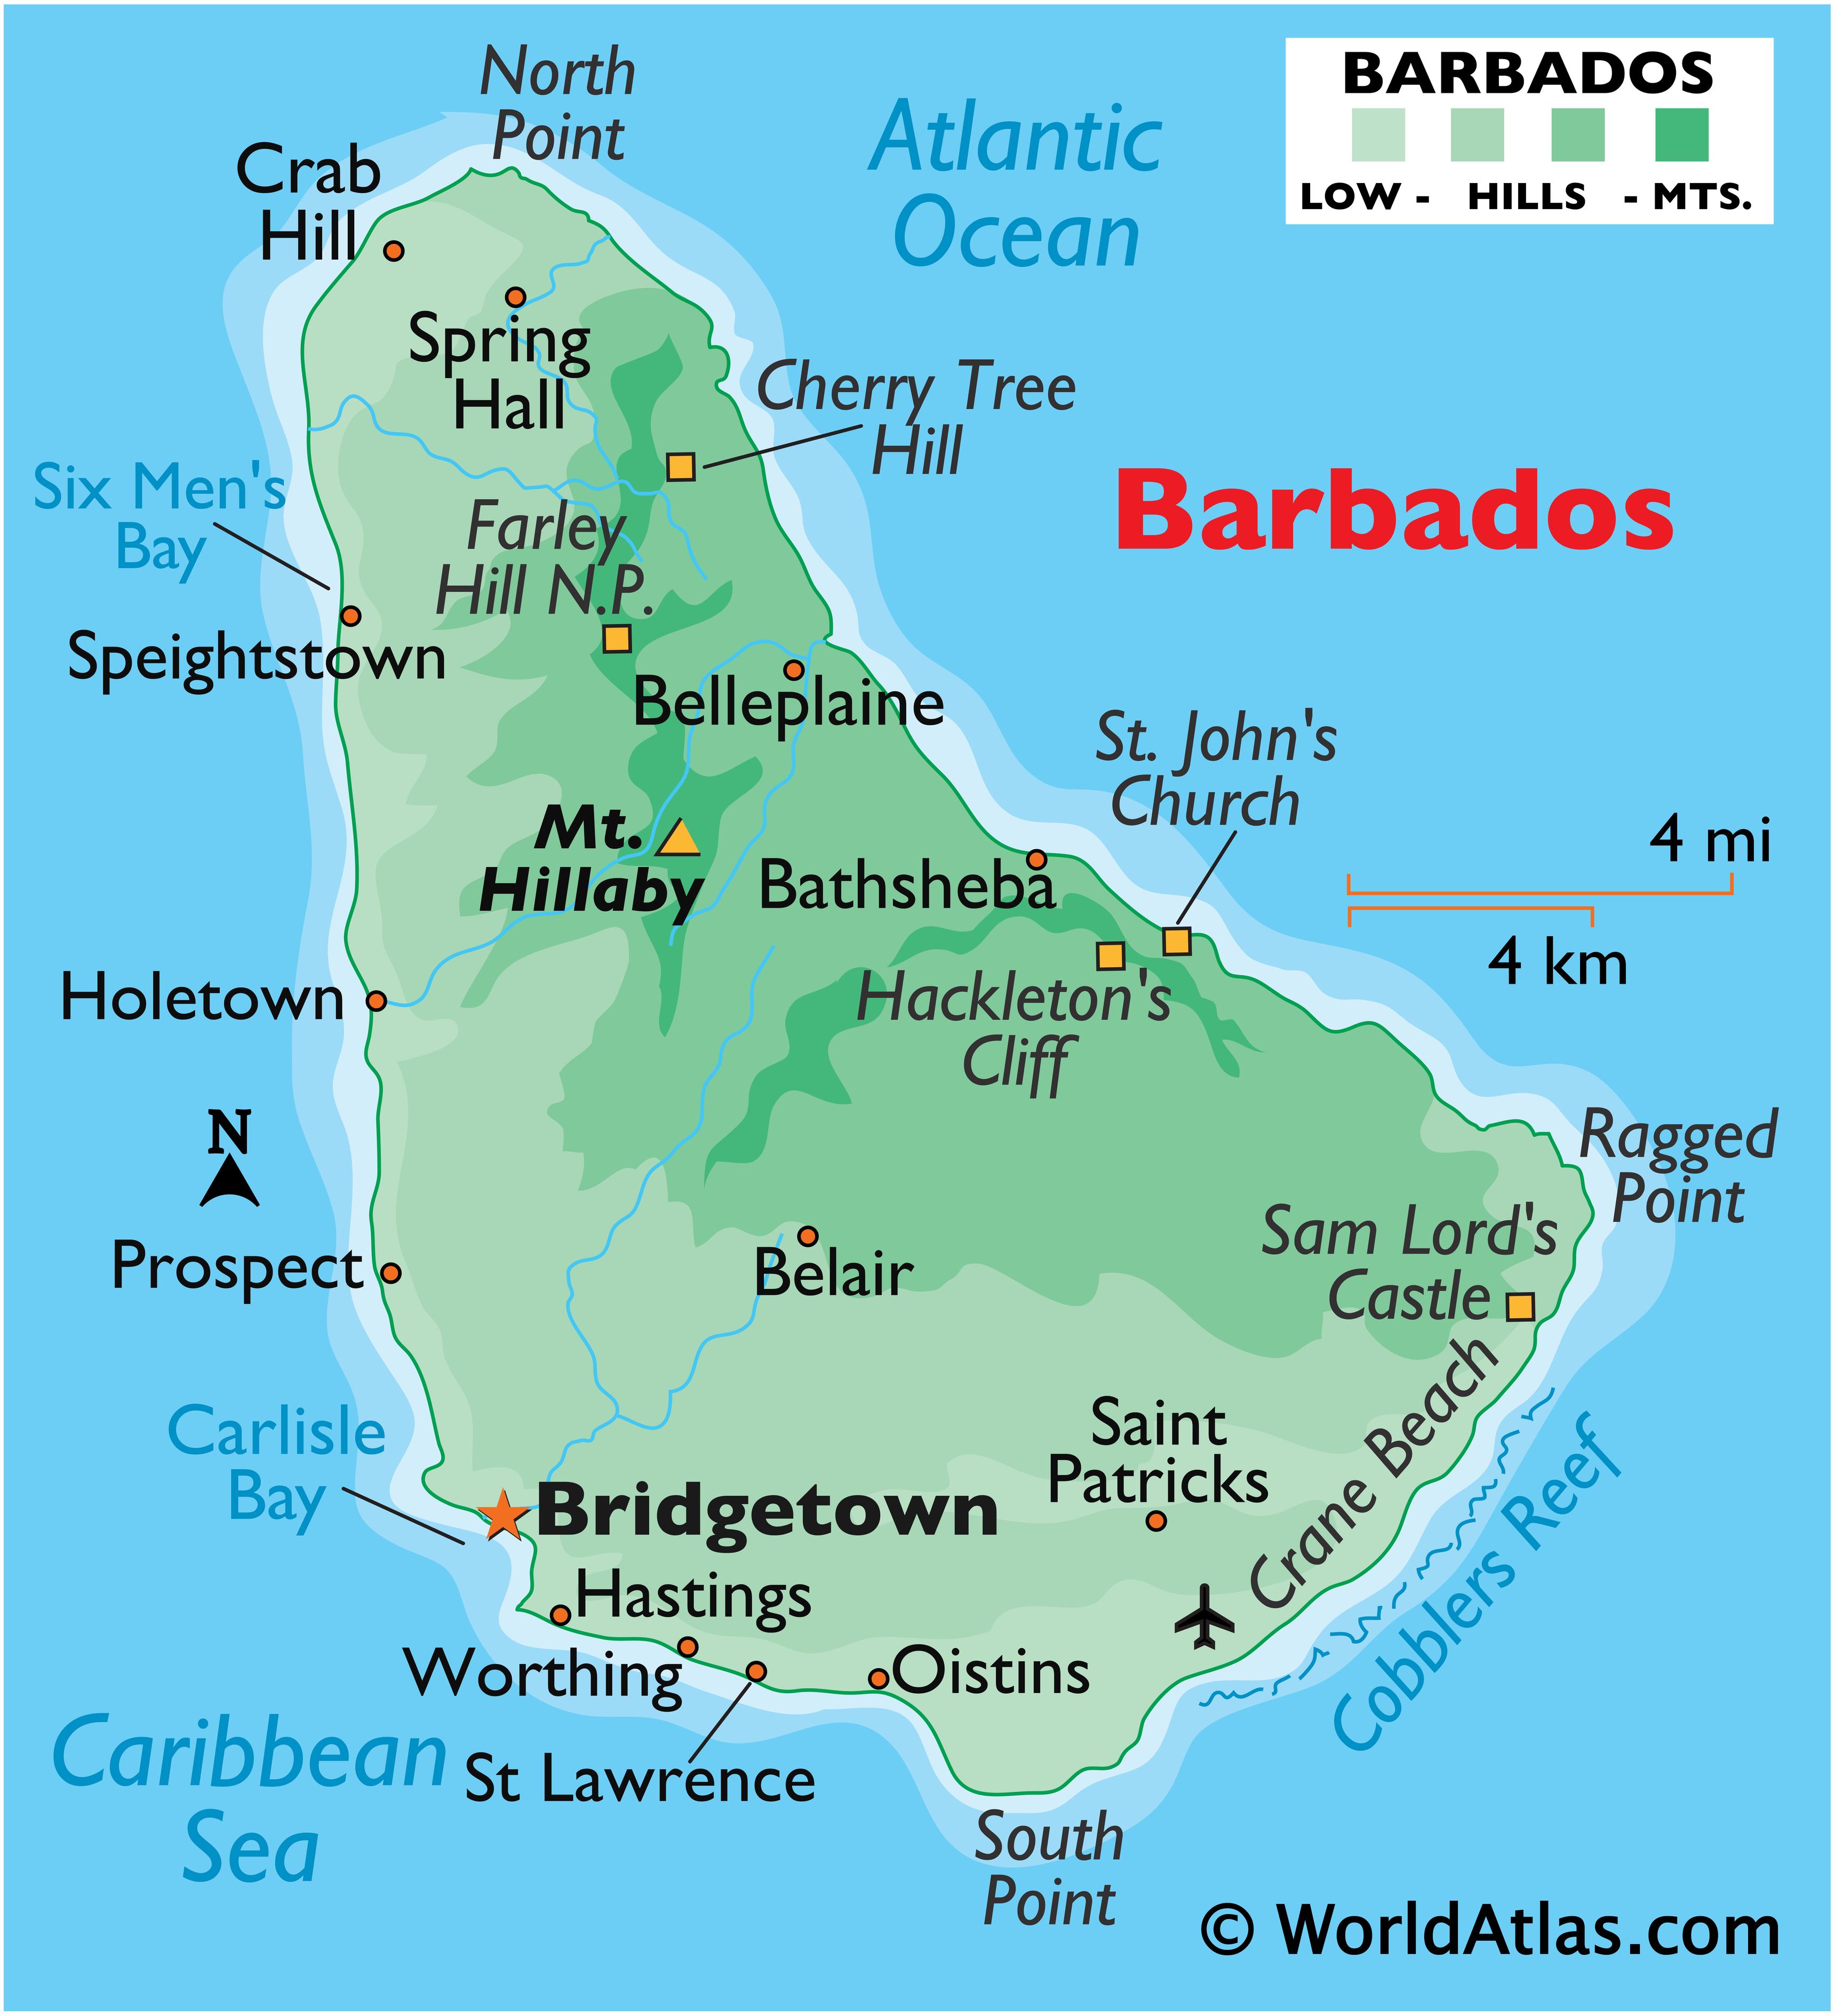 Is Barbados in Jamaica?